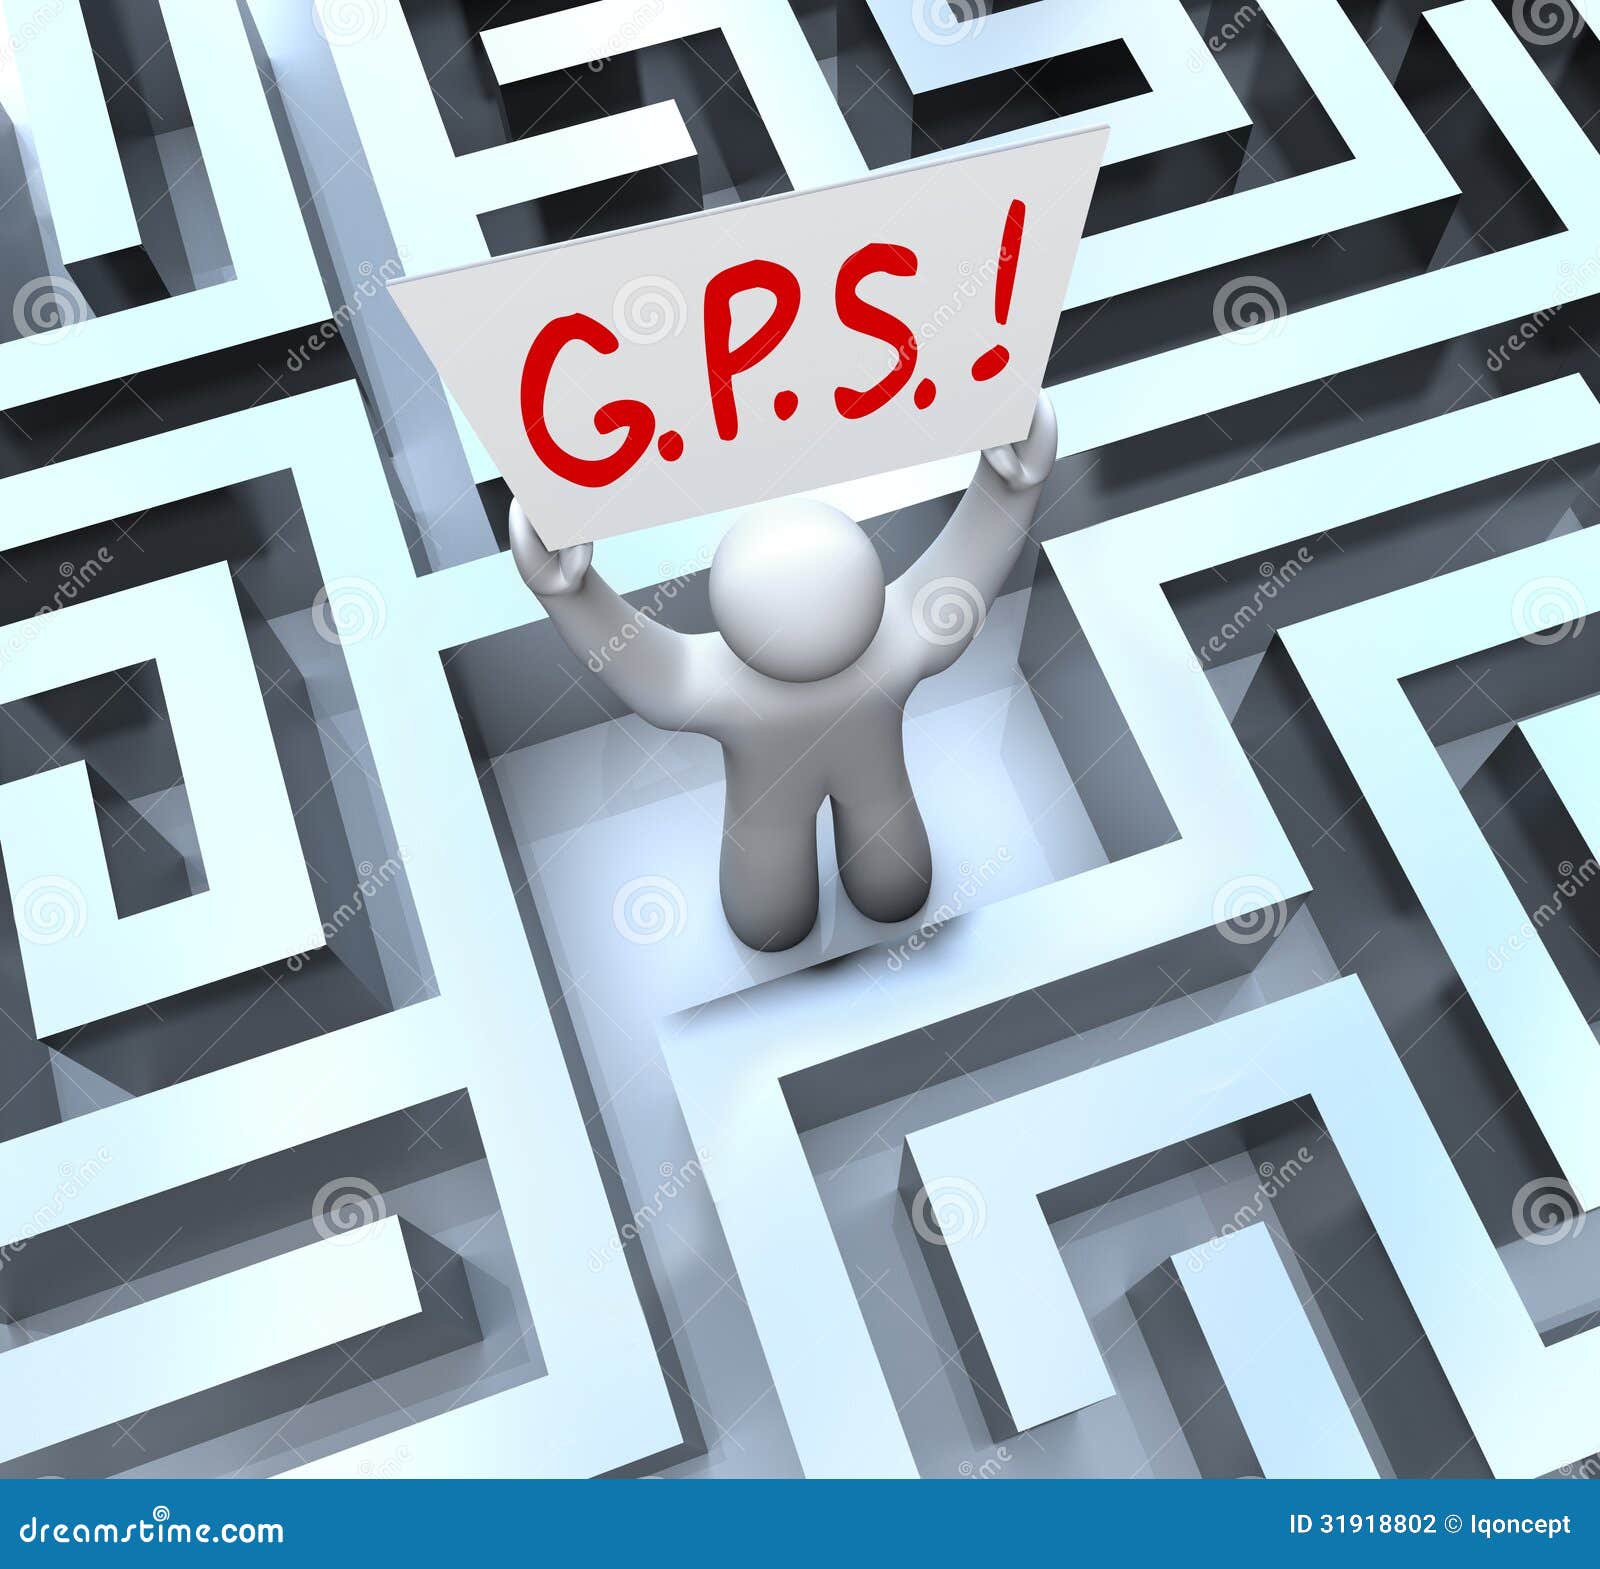 g.p.s. global positioning system person lost in maze